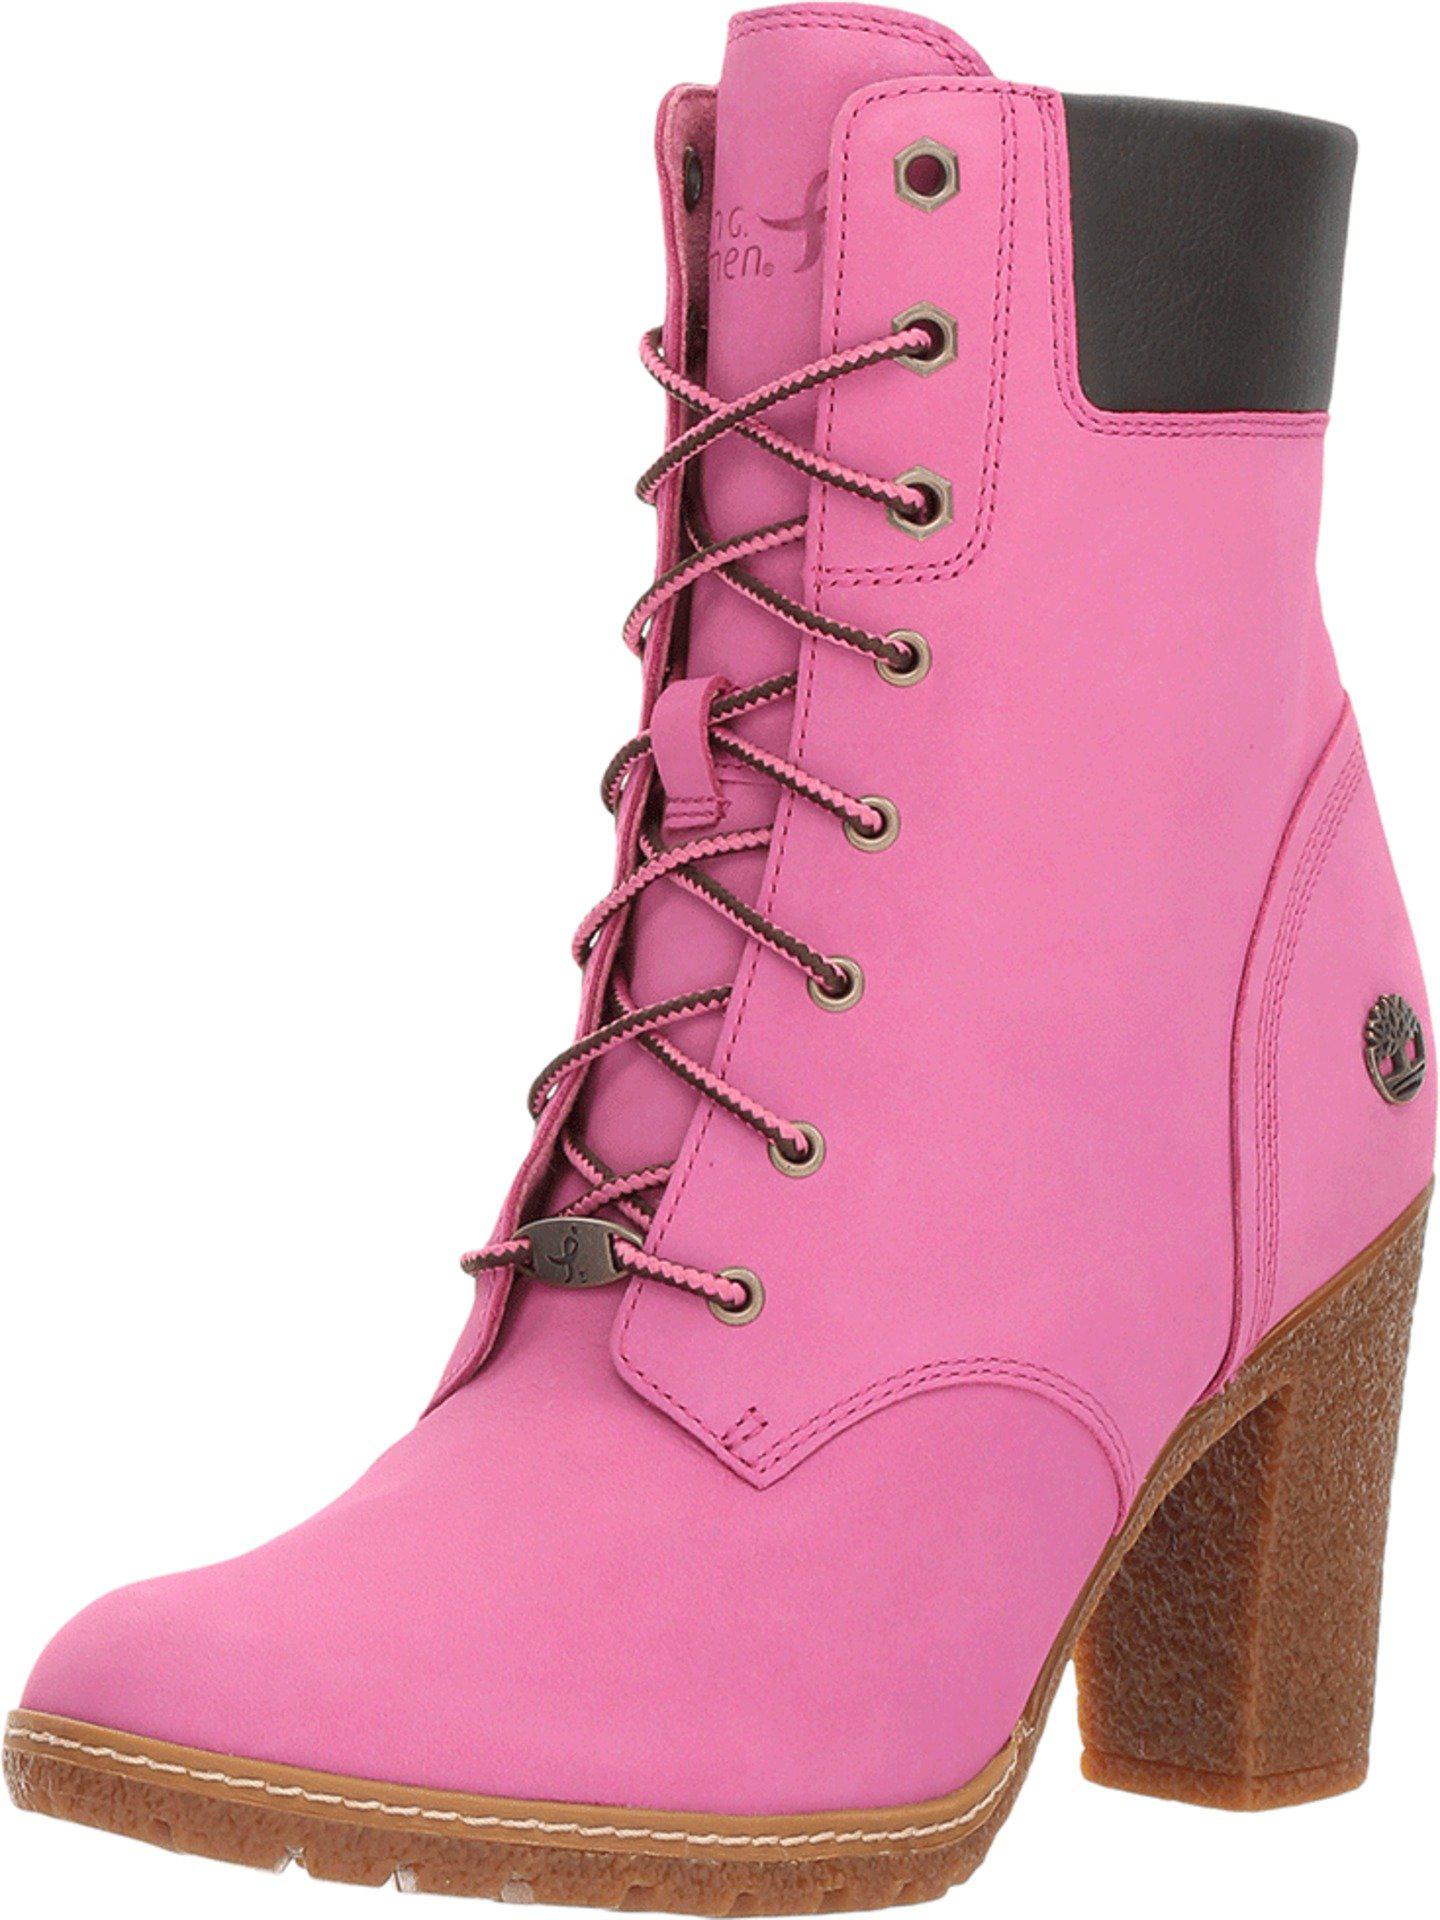 Timberland 6" Boot - Susan G. in Pink | Lyst